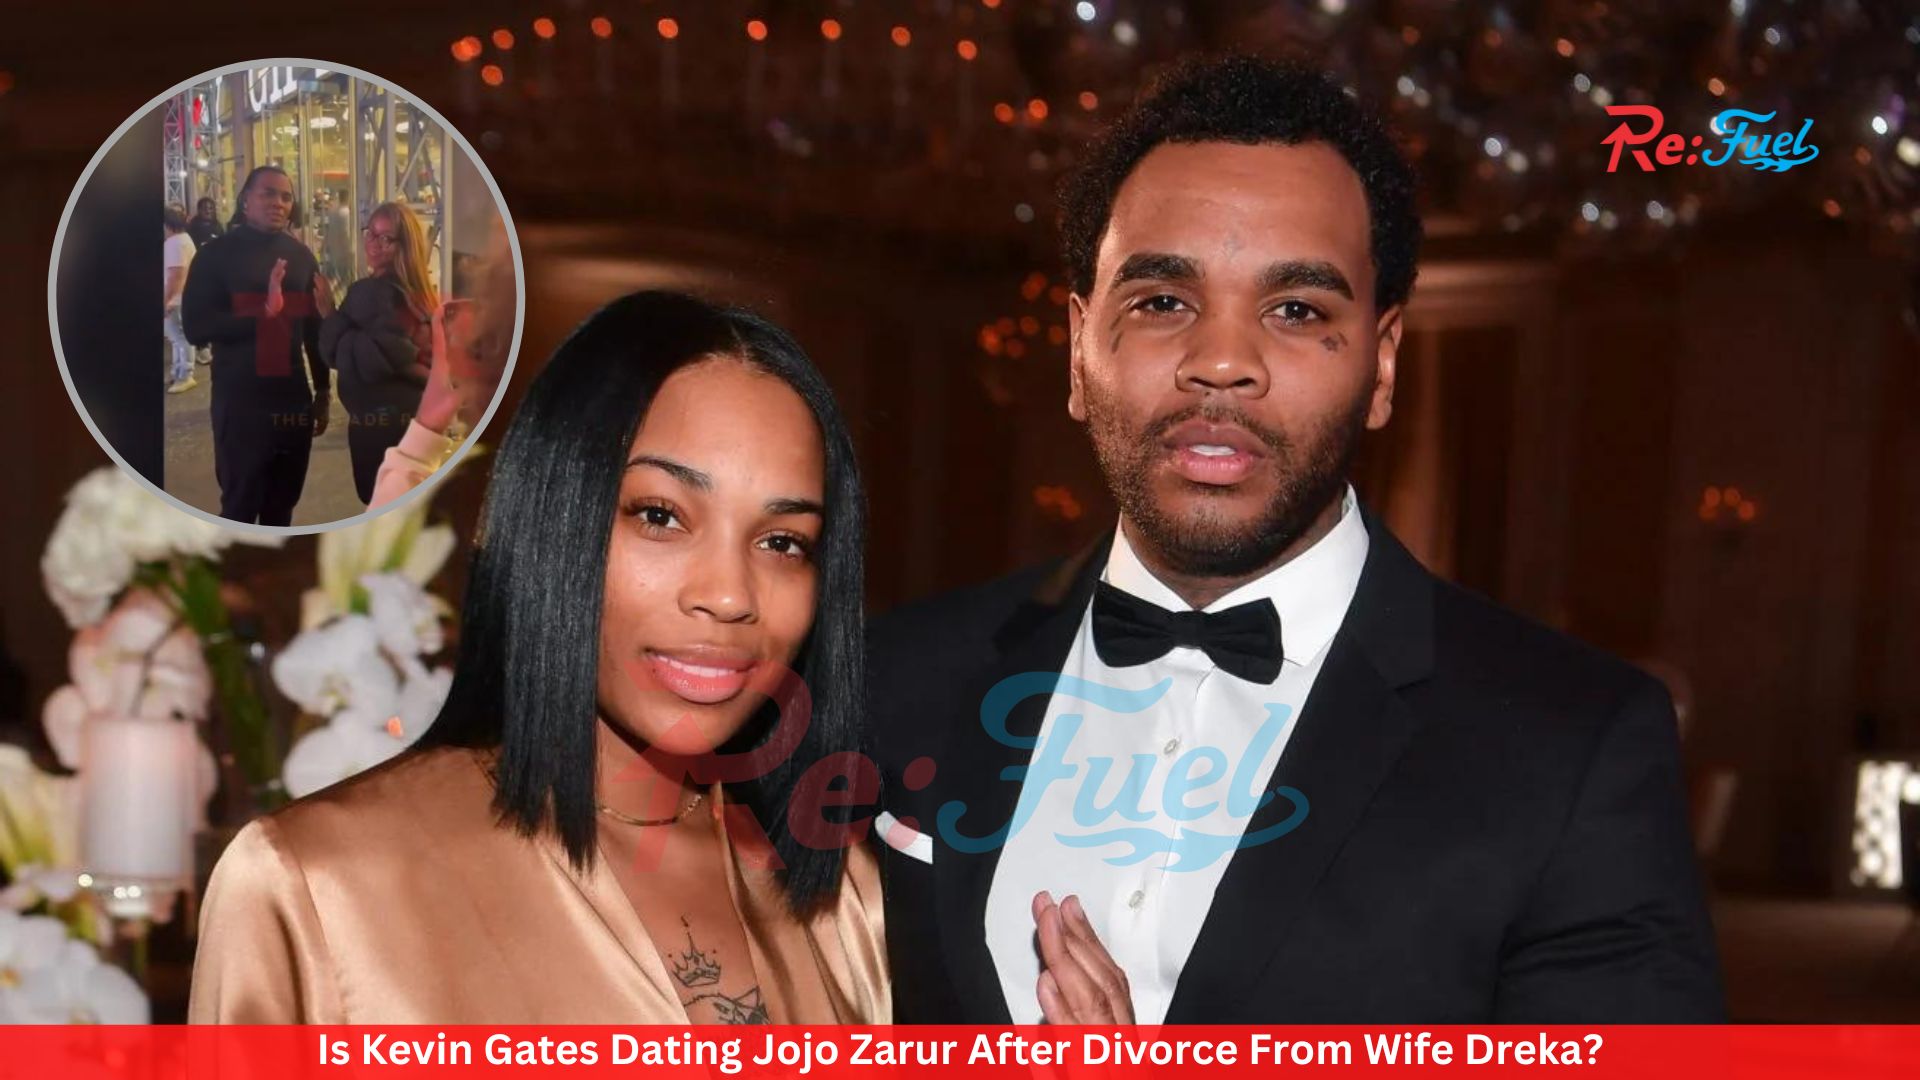 Is Kevin Gates Dating Jojo Zarur After Divorce From Wife Dreka?